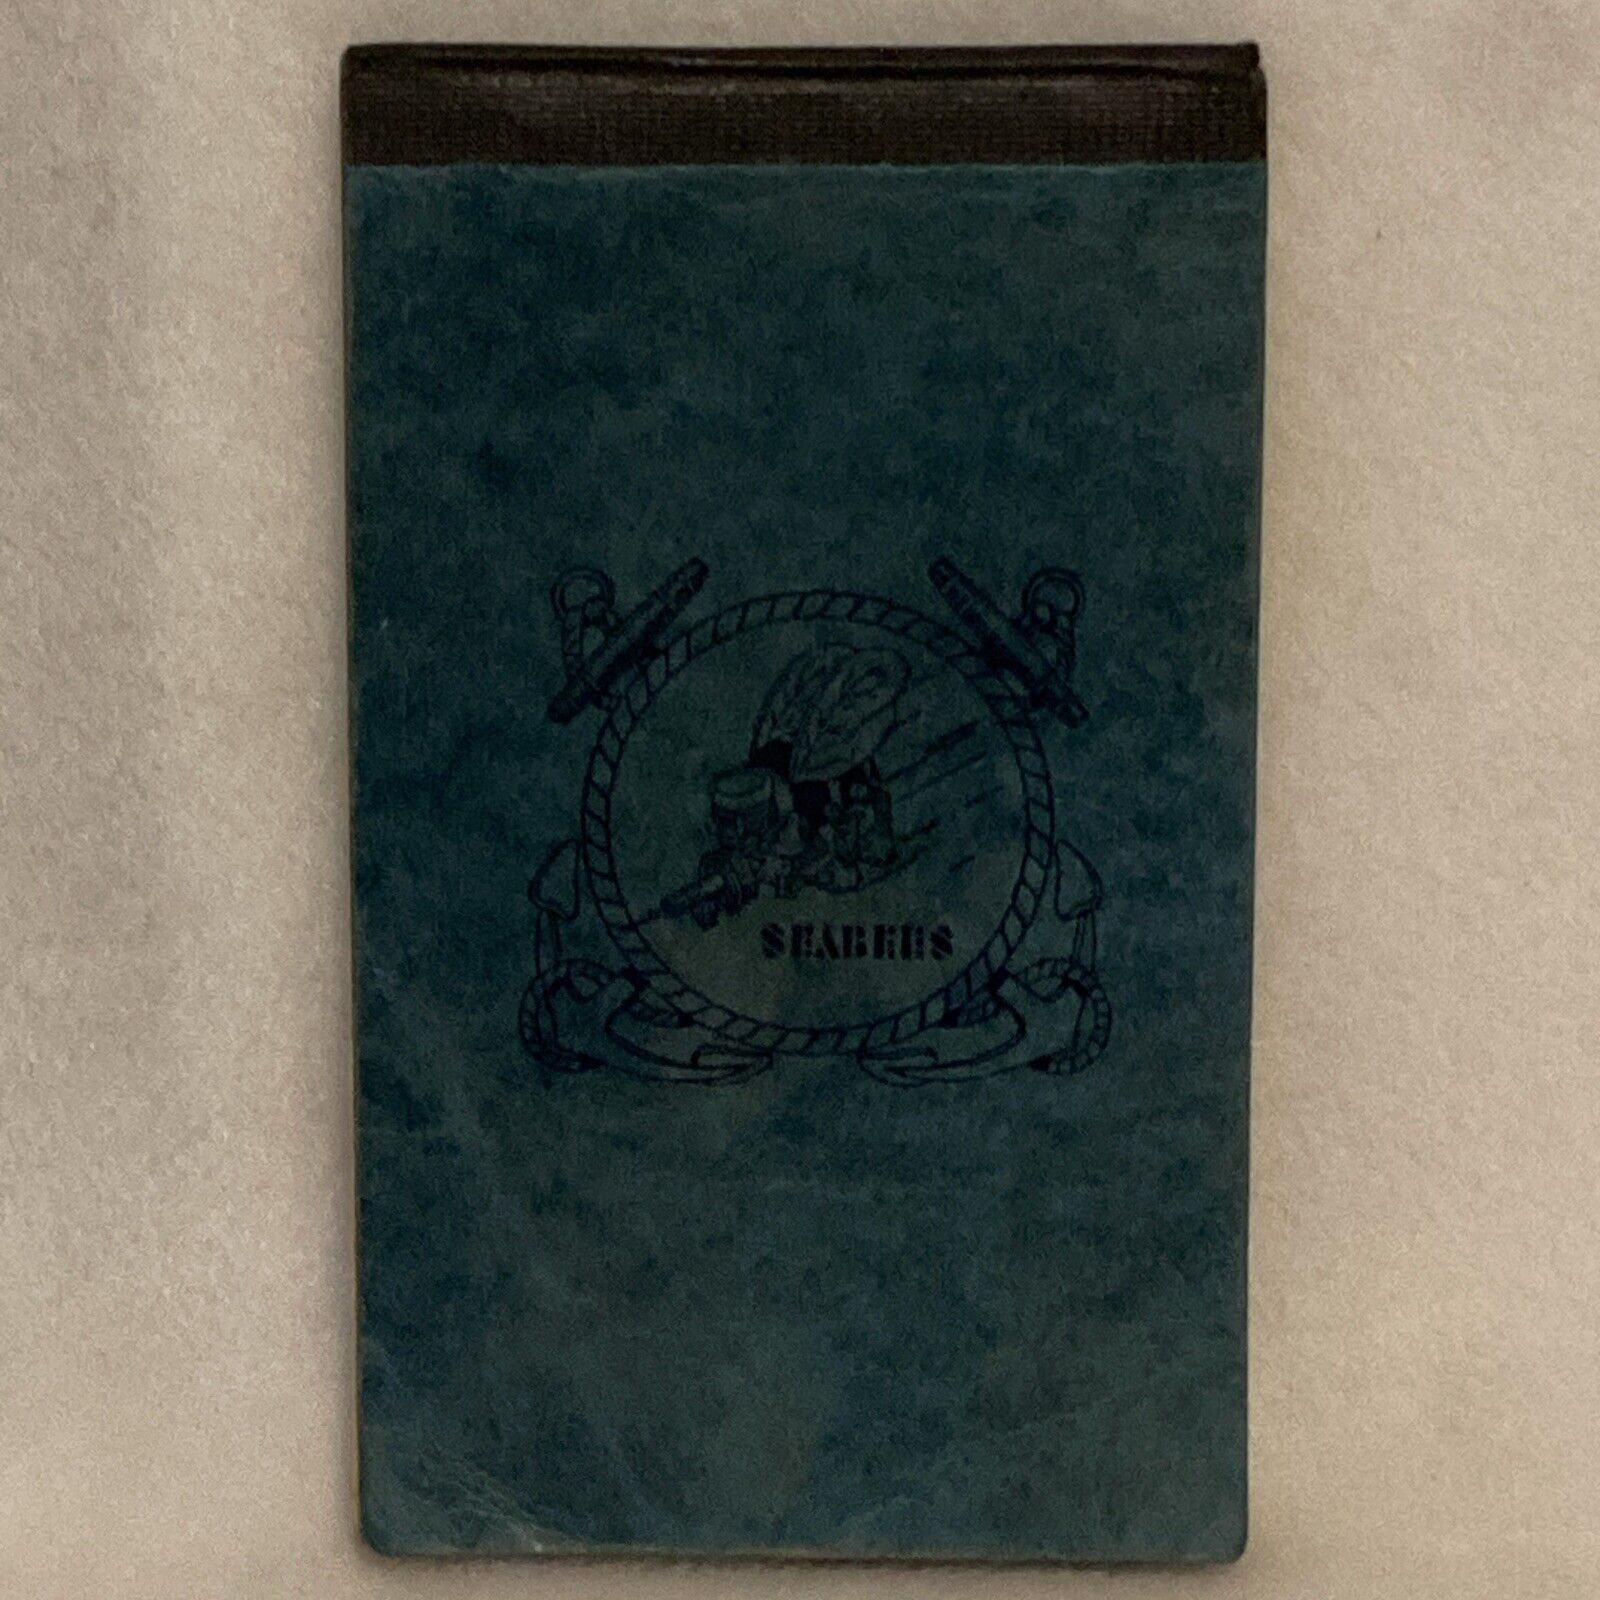 Vintage Early 1940s WW2 Era US Navy Seabees Notepad Mentioning Pearl Harbor